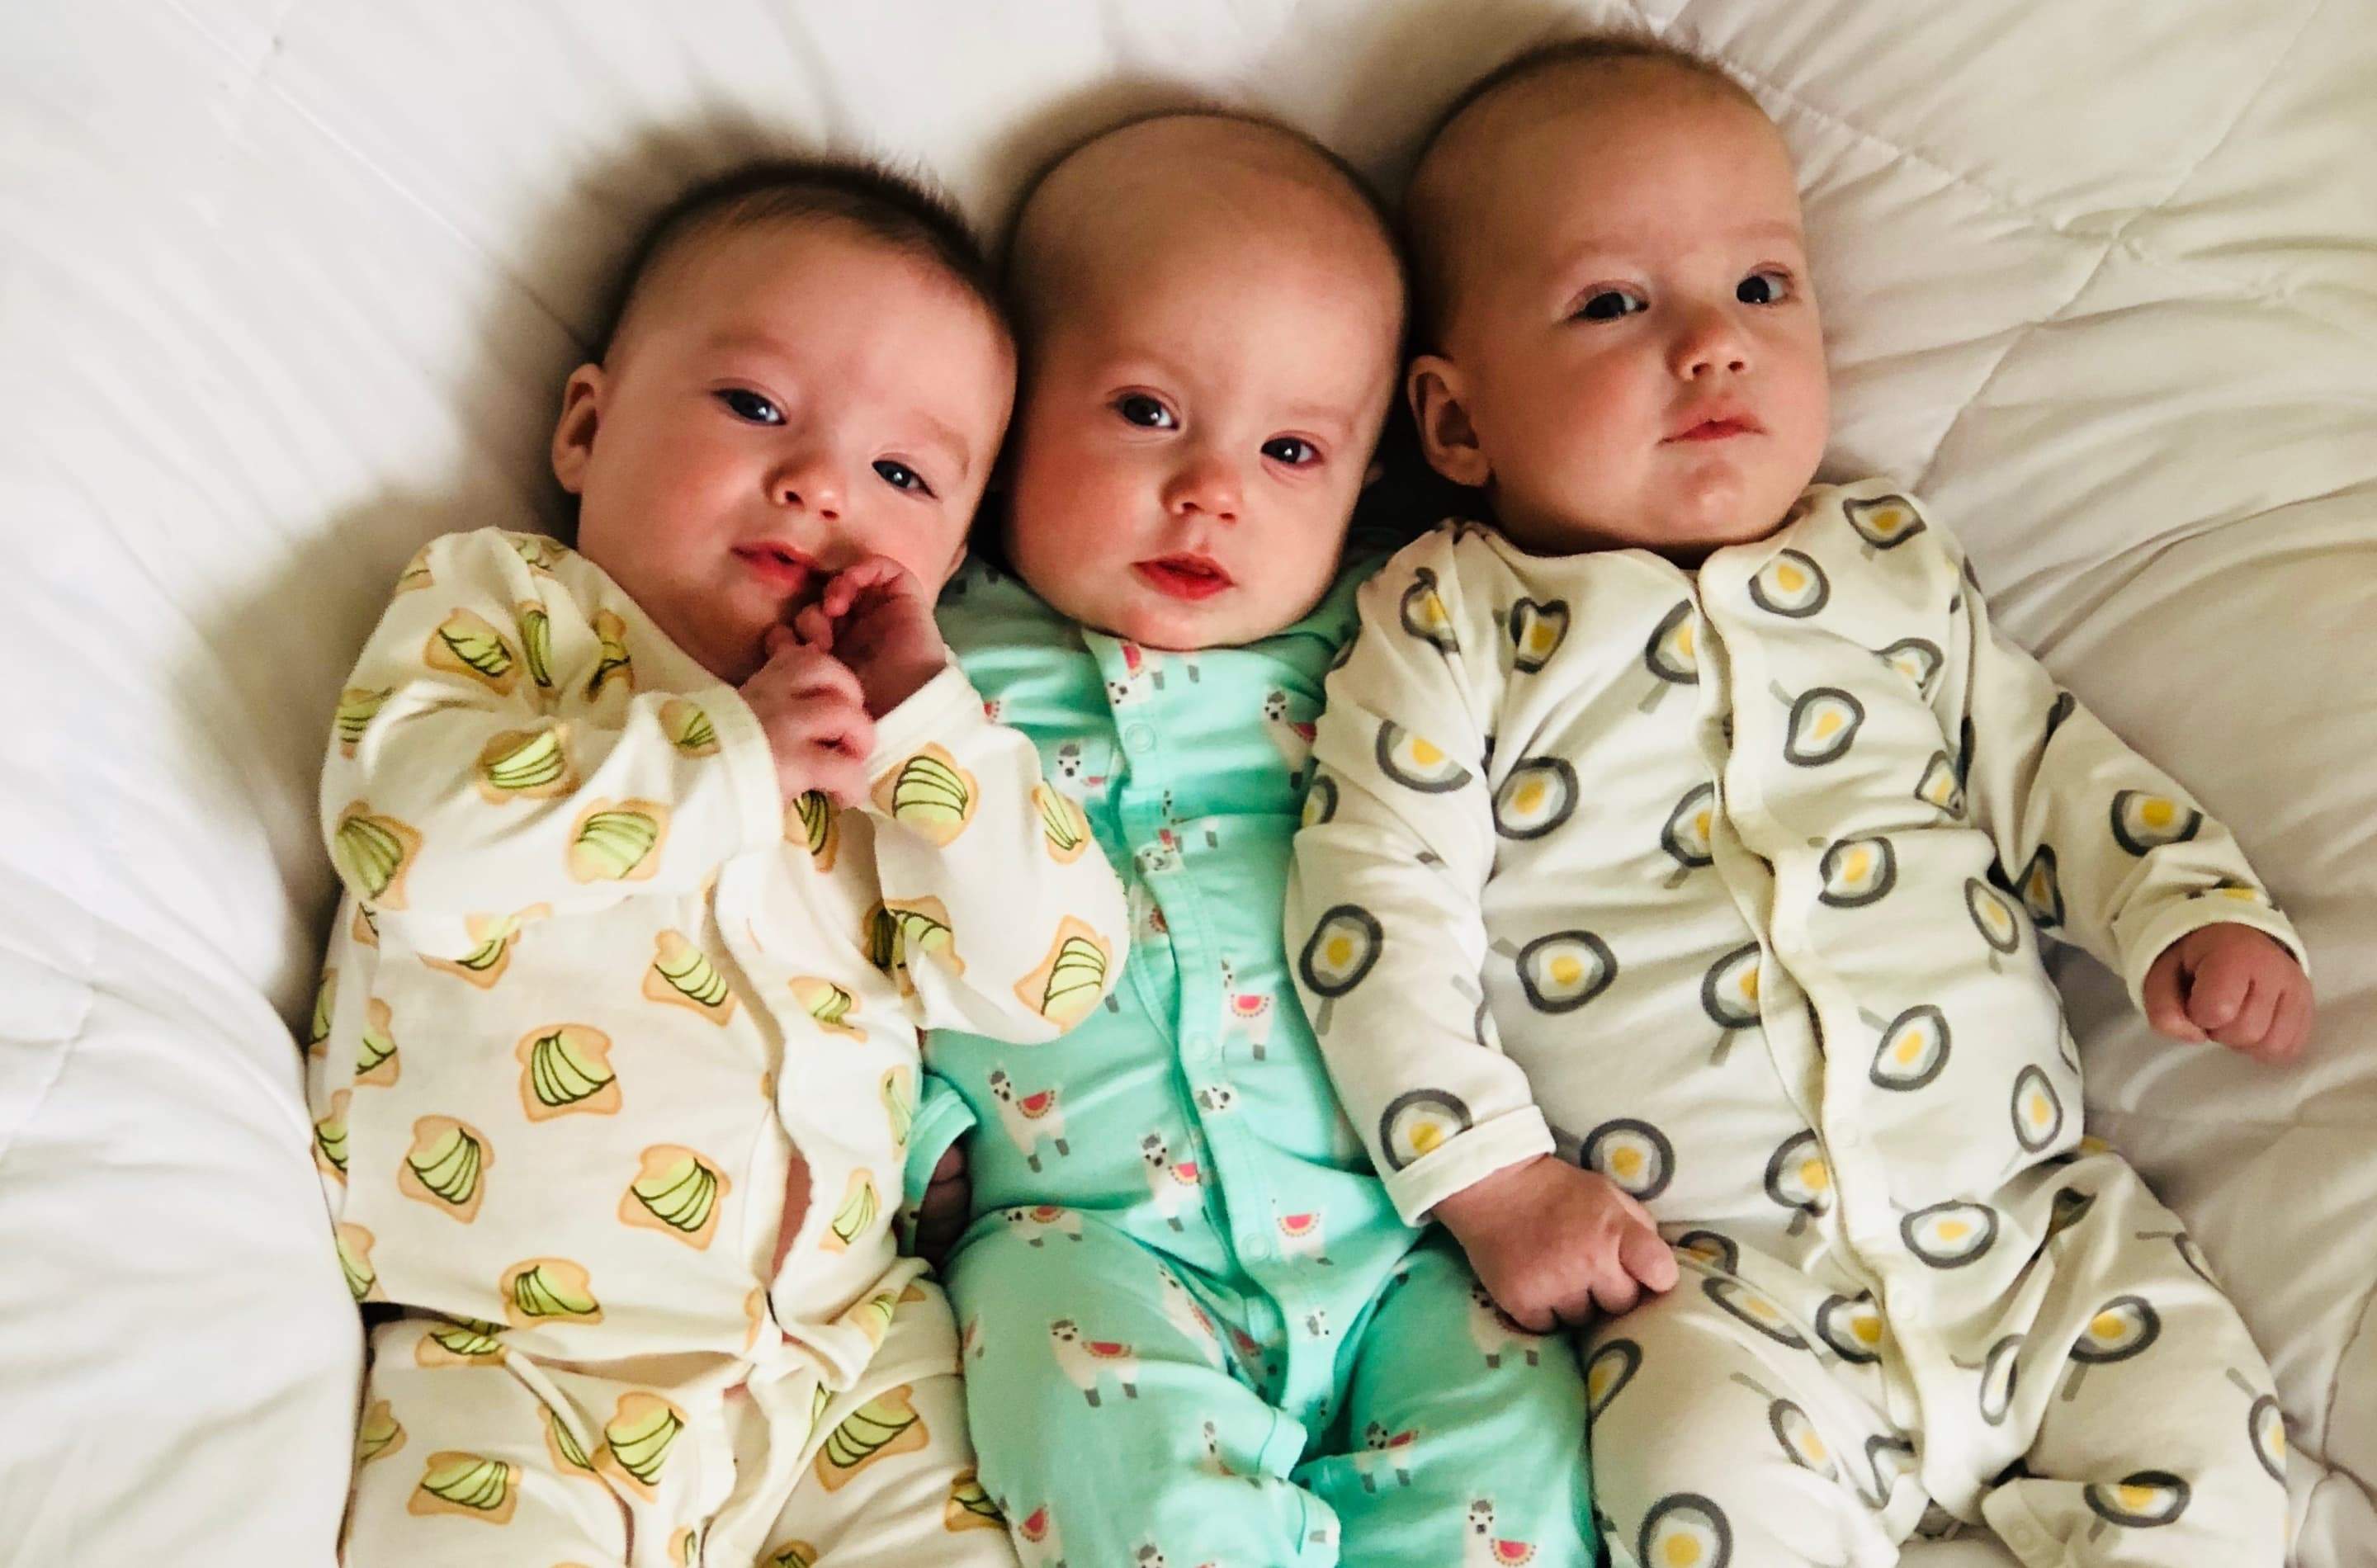 Secrets From a Labor and Delivery Nurse: How I Juggle My Triplets